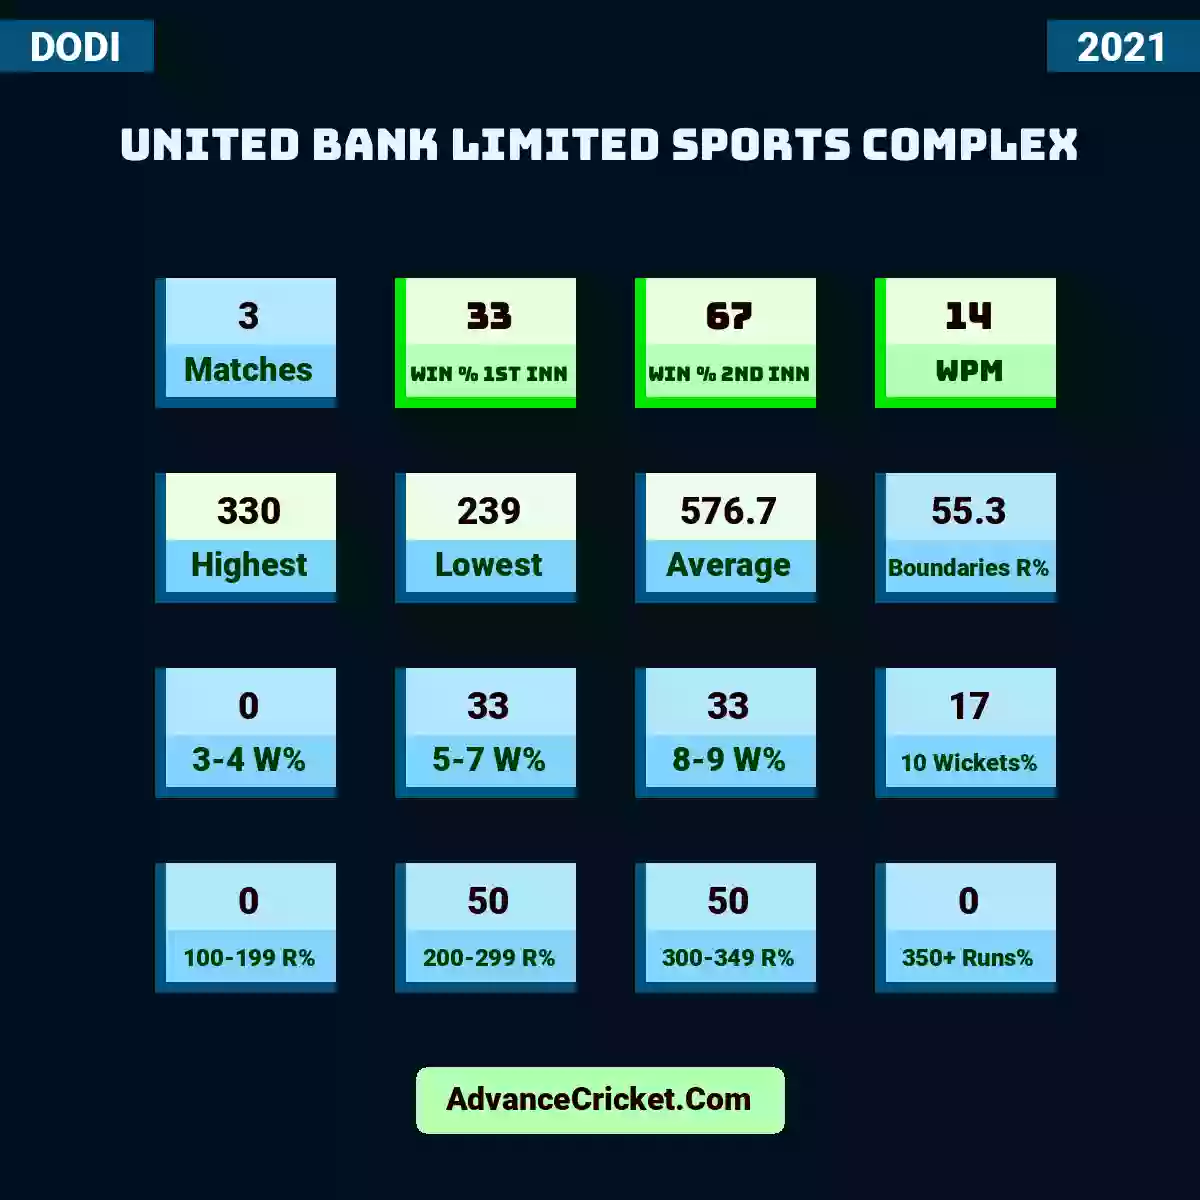 Image showing United Bank Limited Sports Complex with Matches: 3, Win % 1st Inn: 33, Win % 2nd Inn: 67, WPM: 14, Highest: 330, Lowest: 239, Average: 576.7, Boundaries R%: 55.3, 3-4 W%: 0, 5-7 W%: 33, 8-9 W%: 33, 10 Wickets%: 17, 100-199 R%: 0, 200-299 R%: 50, 300-349 R%: 50, 350+ Runs%: 0.